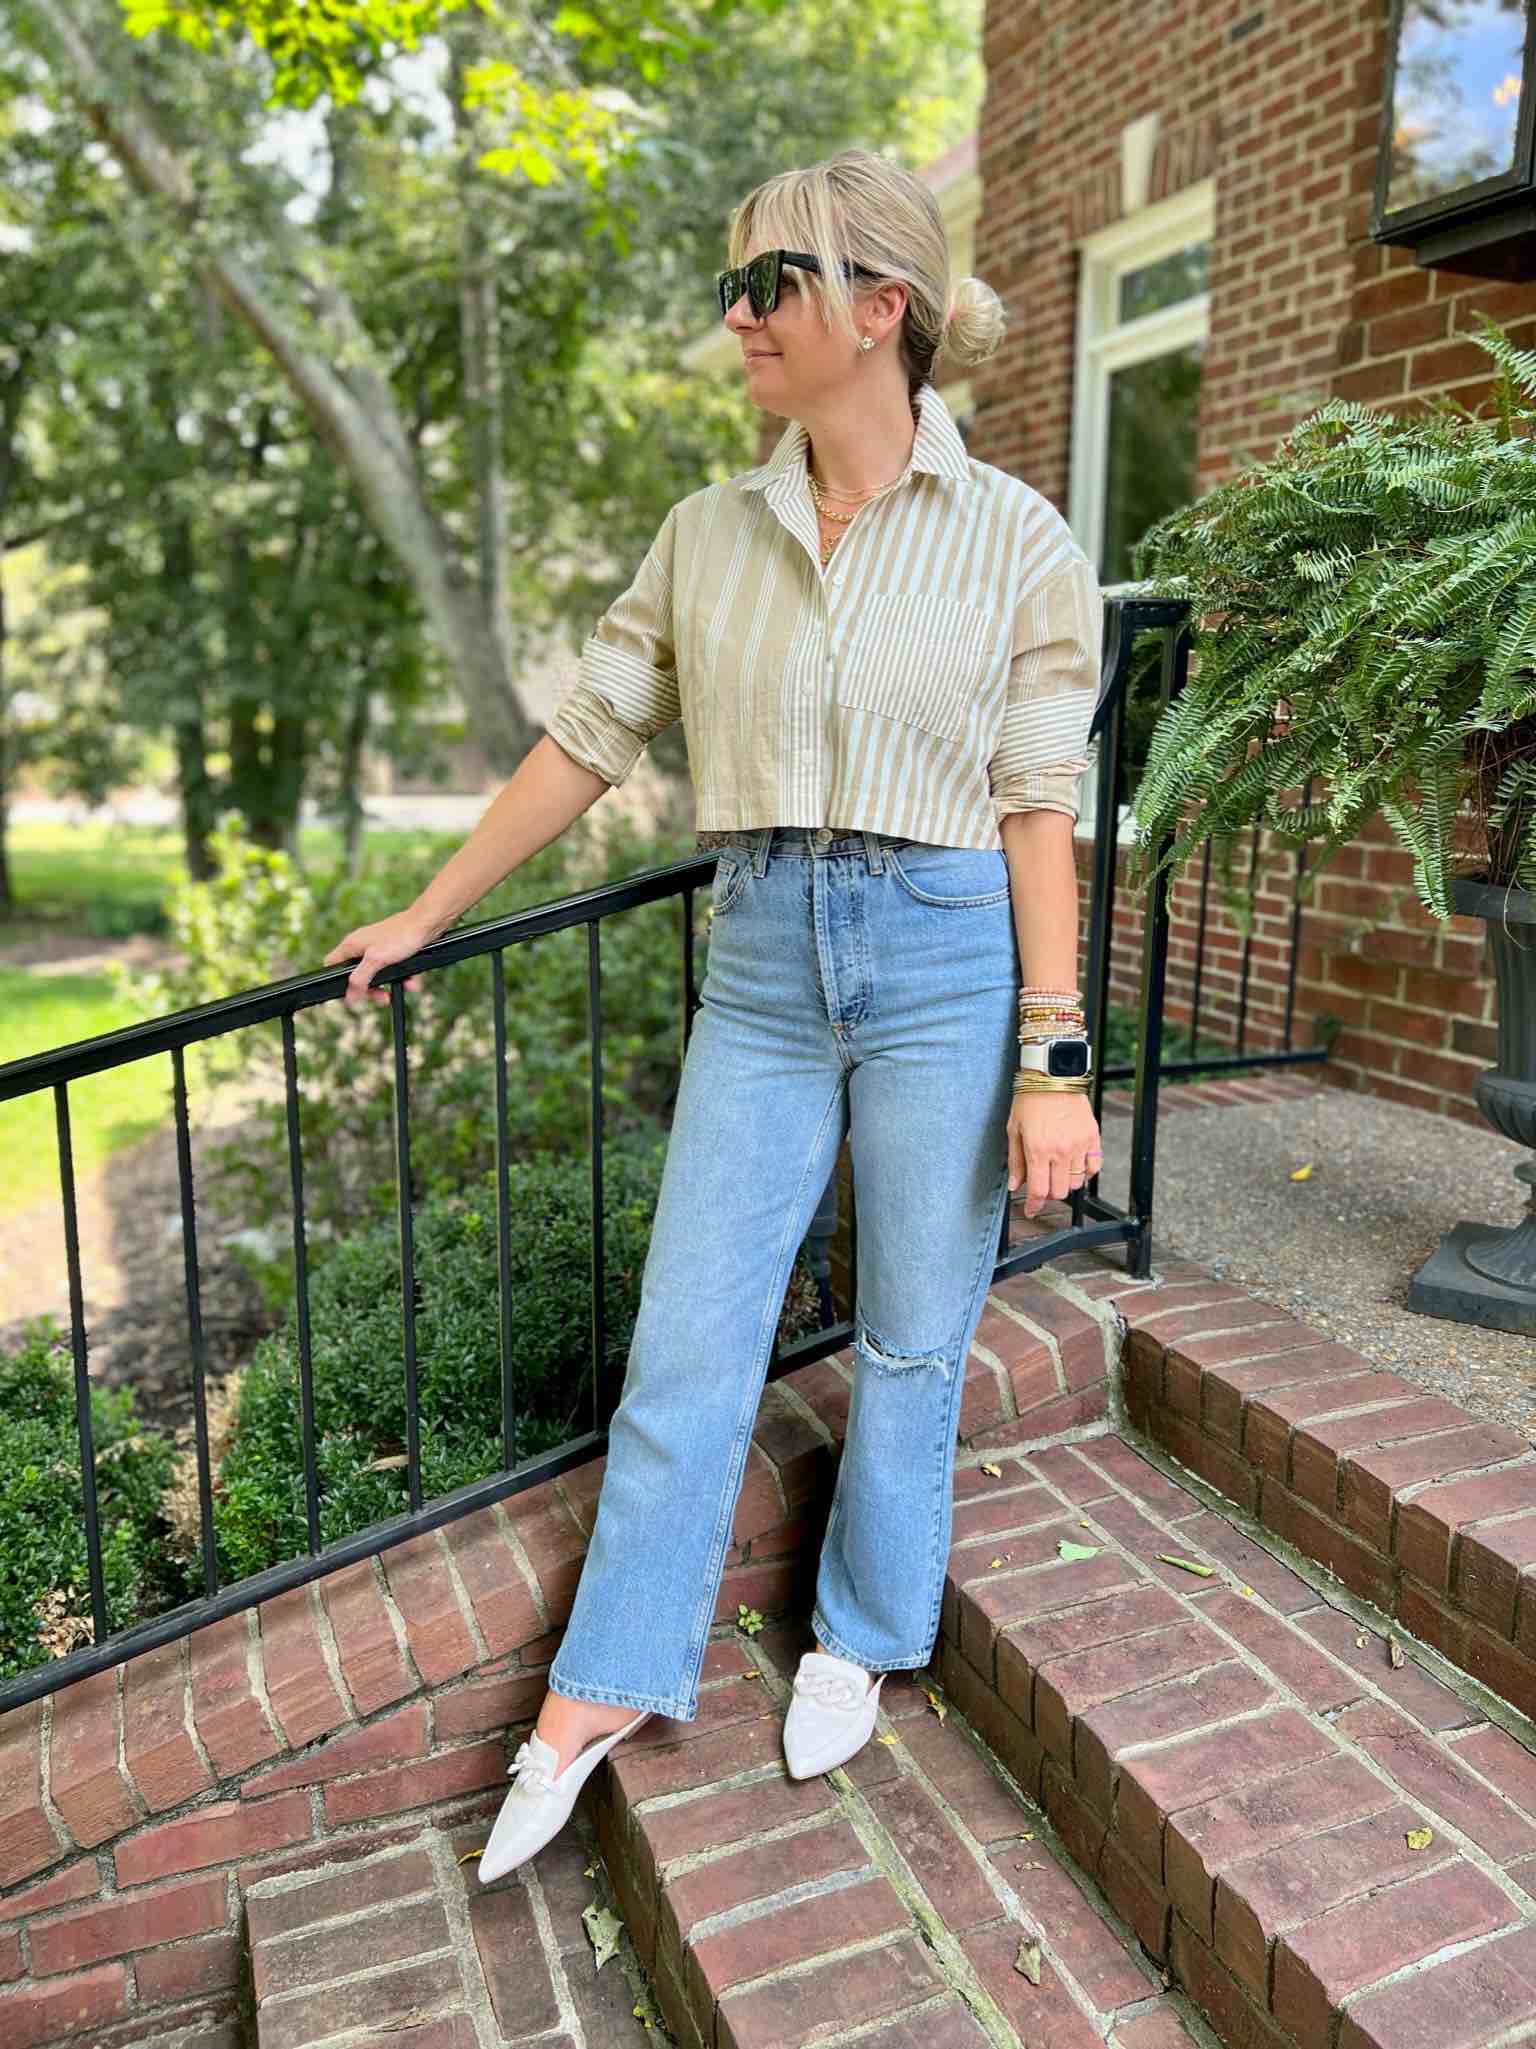 Cropped Button-Up Shirt & Jeans how to style straight leg jeans the best mules how to style a button-up shirt how to wear a cropped shirt in your 40s nashville stylists share fun looks